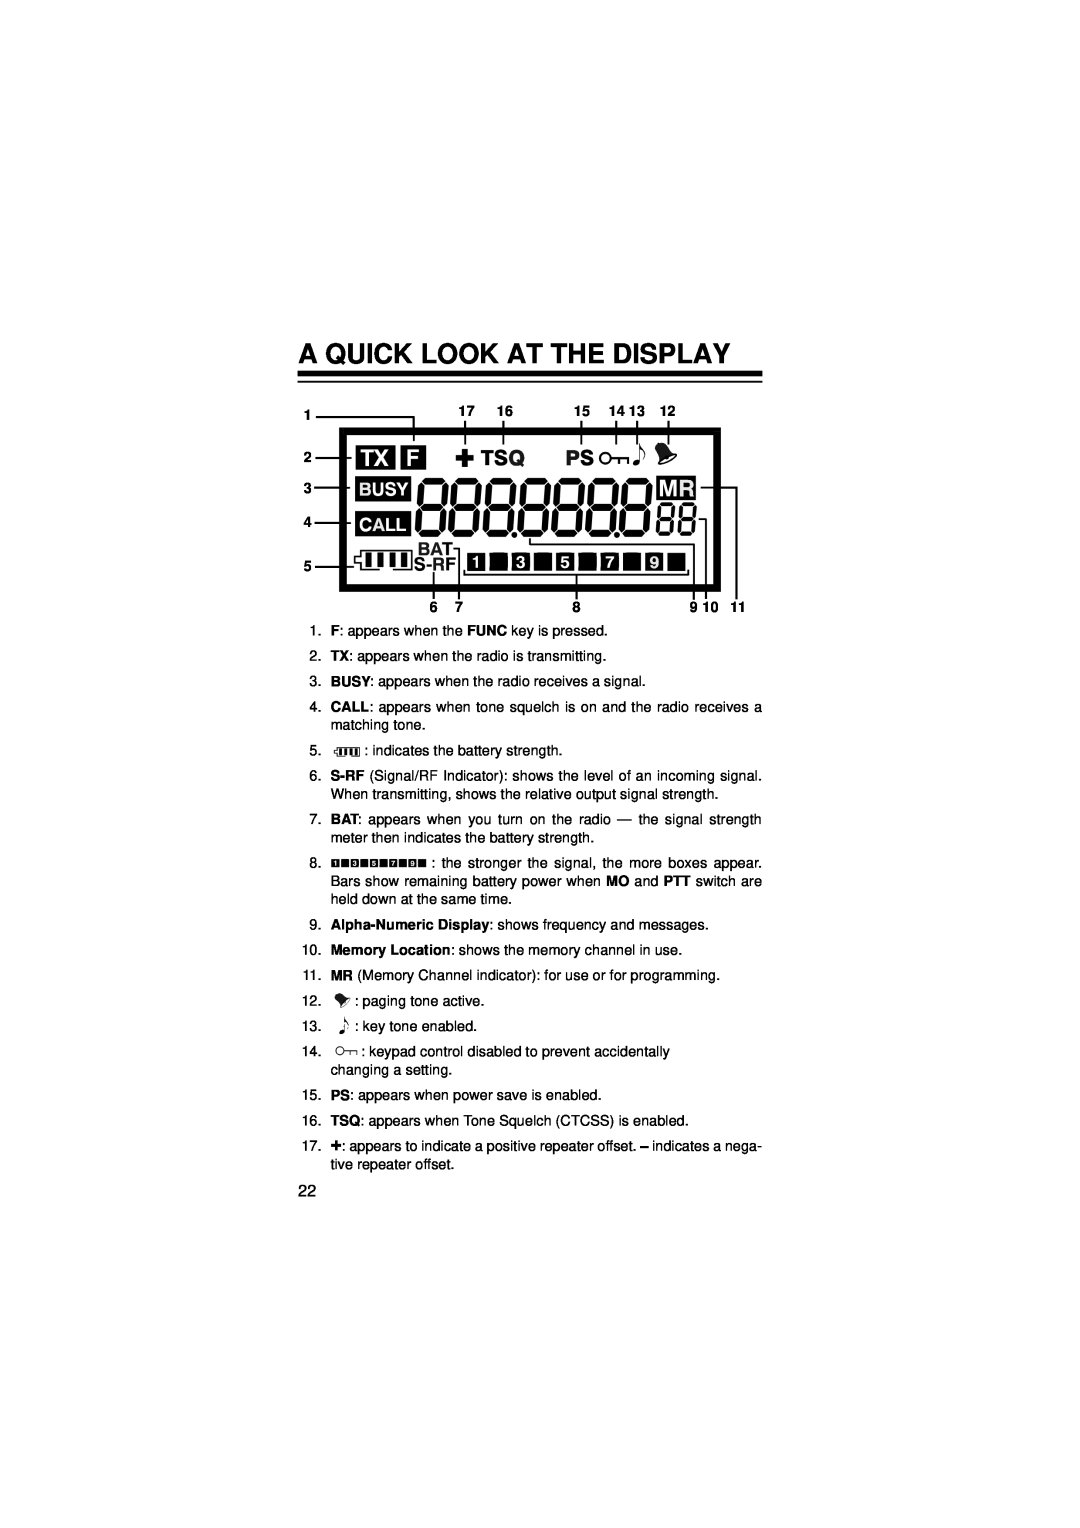 Radio Shack HTX-200 owner manual A Quick Look At The Display 